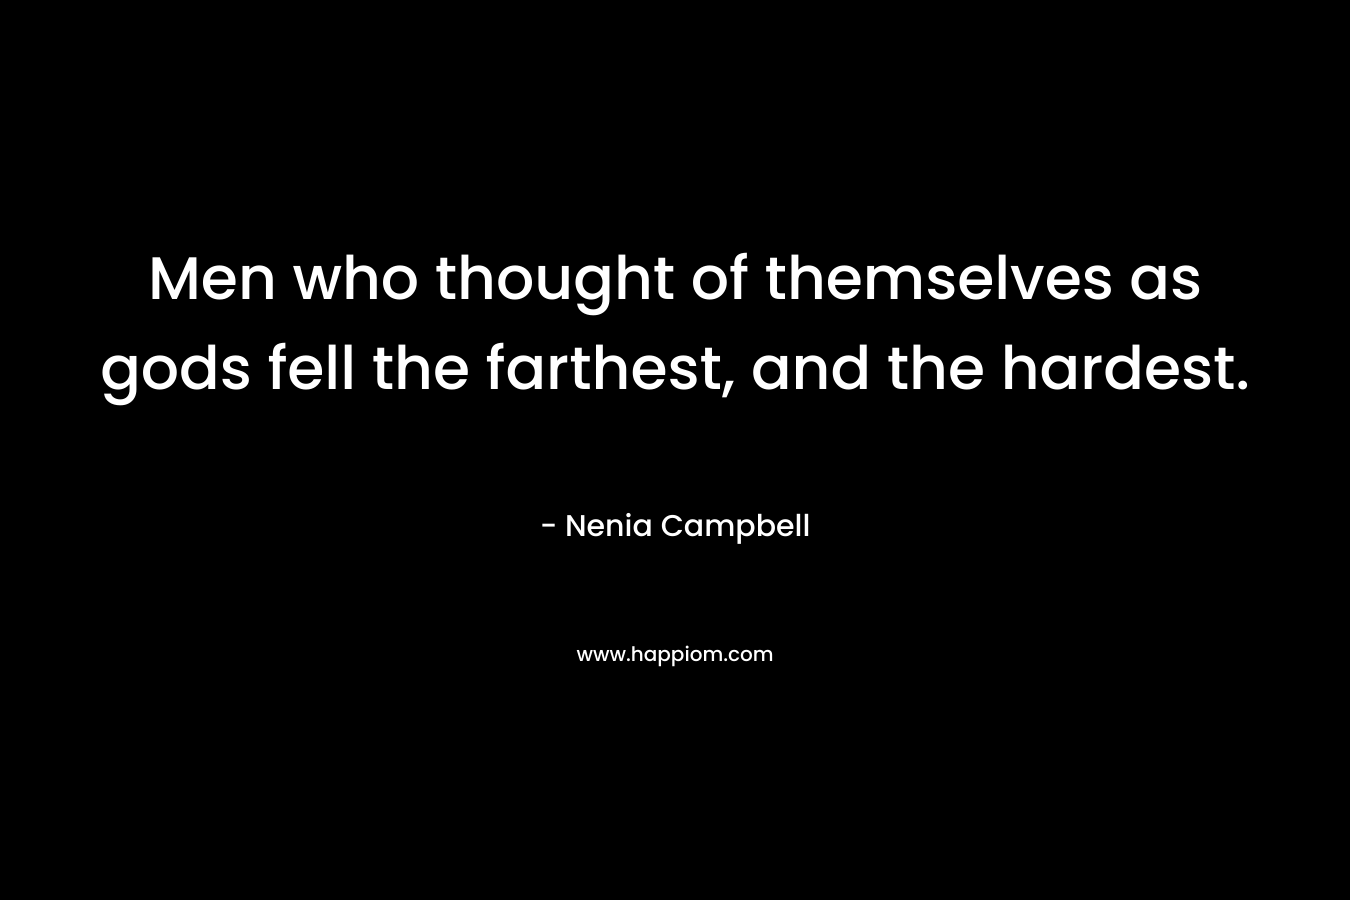 Men who thought of themselves as gods fell the farthest, and the hardest. – Nenia Campbell